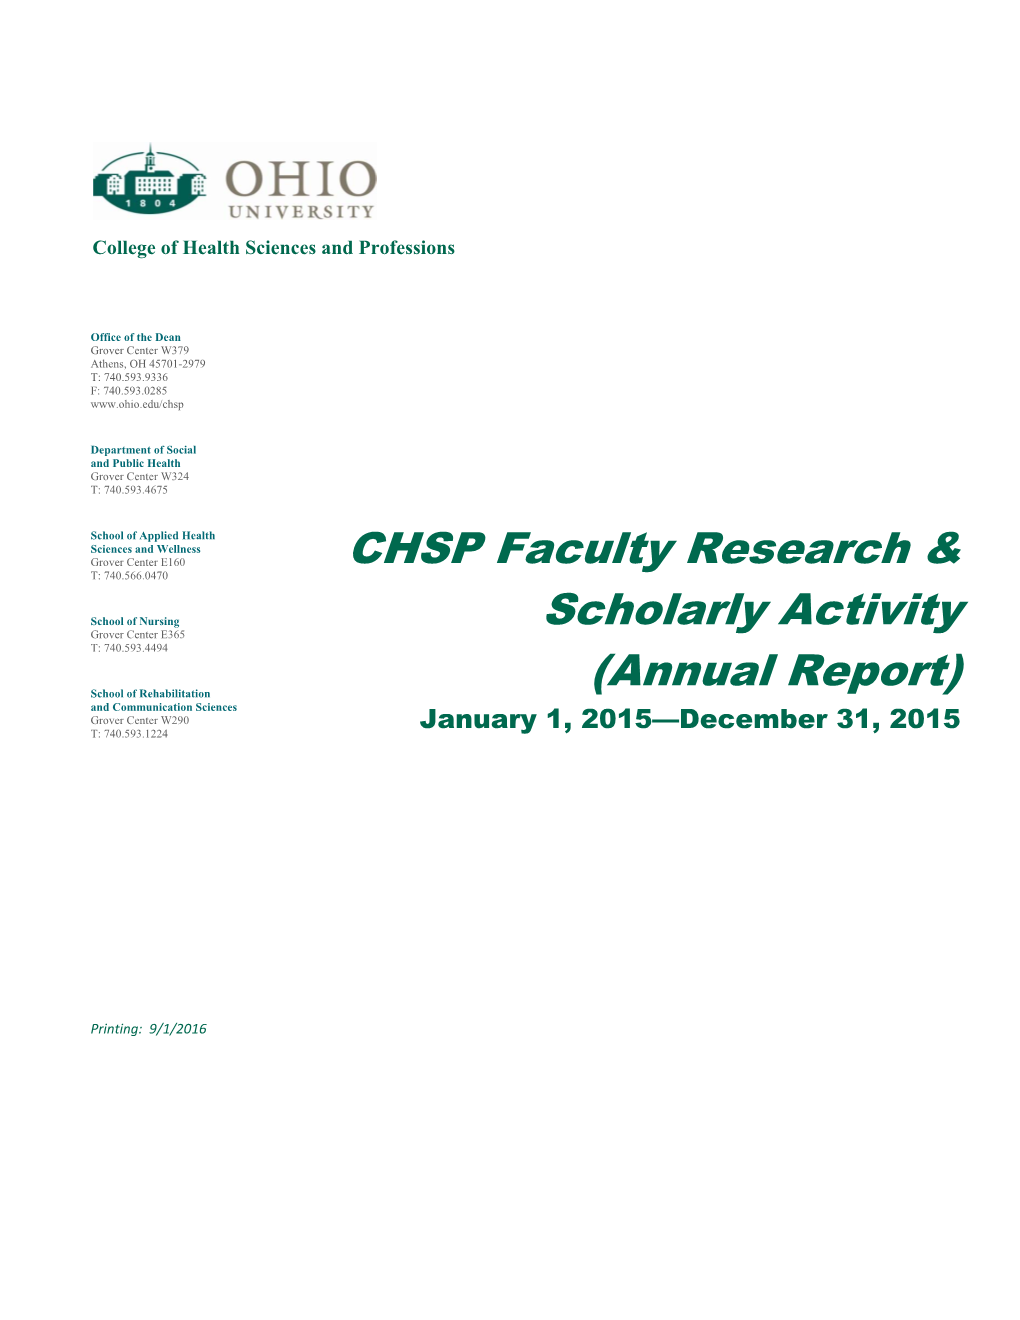 CHSP Faculty Research & Scholarly Activity (Annual Report)